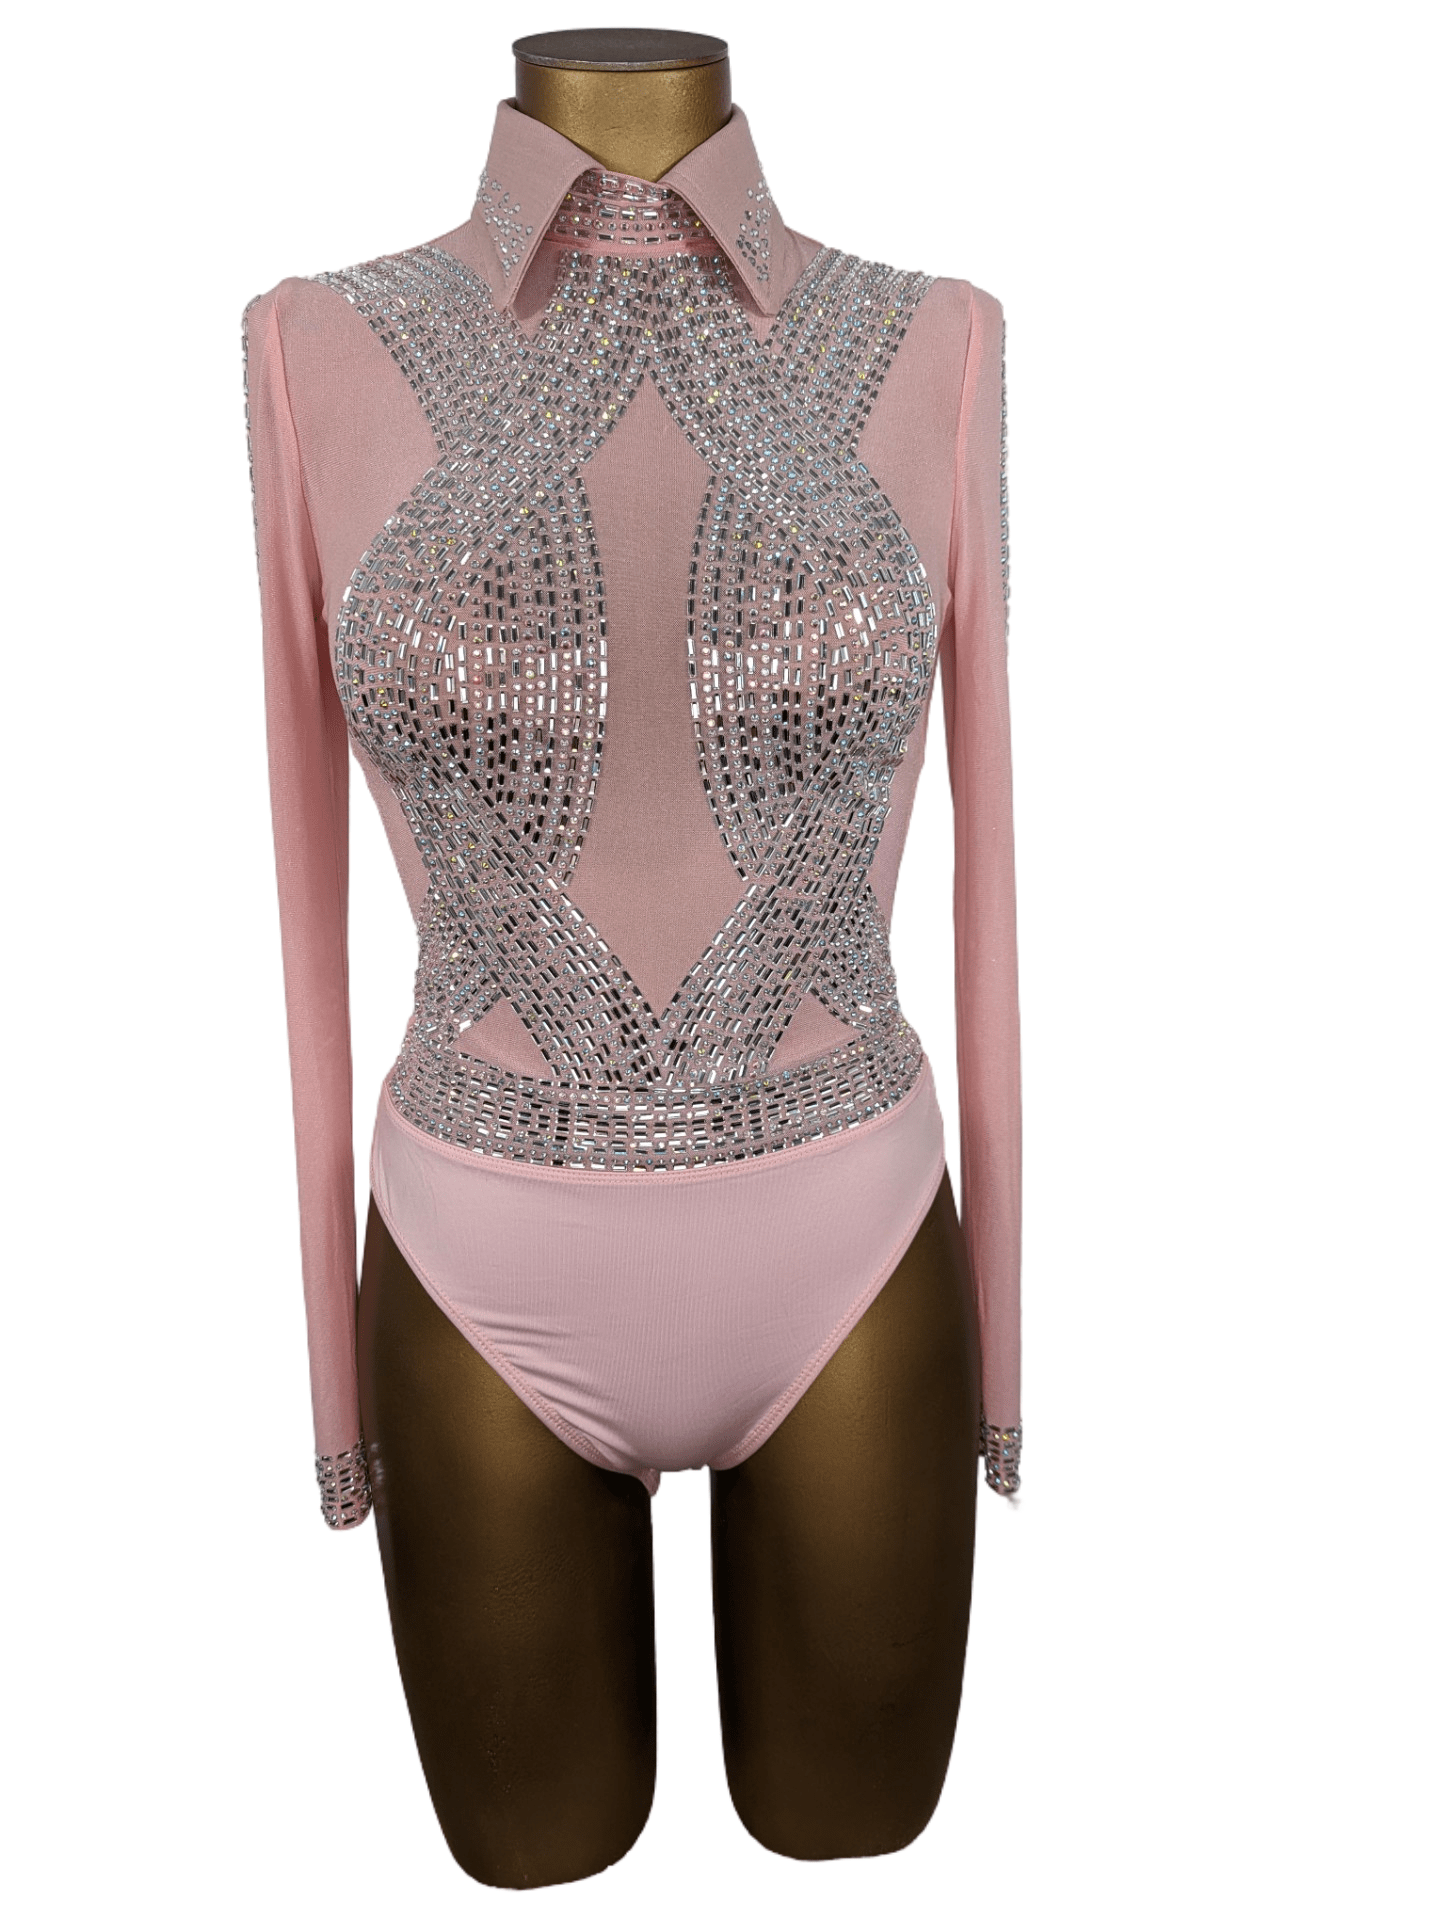 sparkle-ridge-womens-western-wear-affordable-show-clothes-horse-shirts-with-bling-rodeo-bodysuit-light-pink-elegant-darling-front.png (Copy)